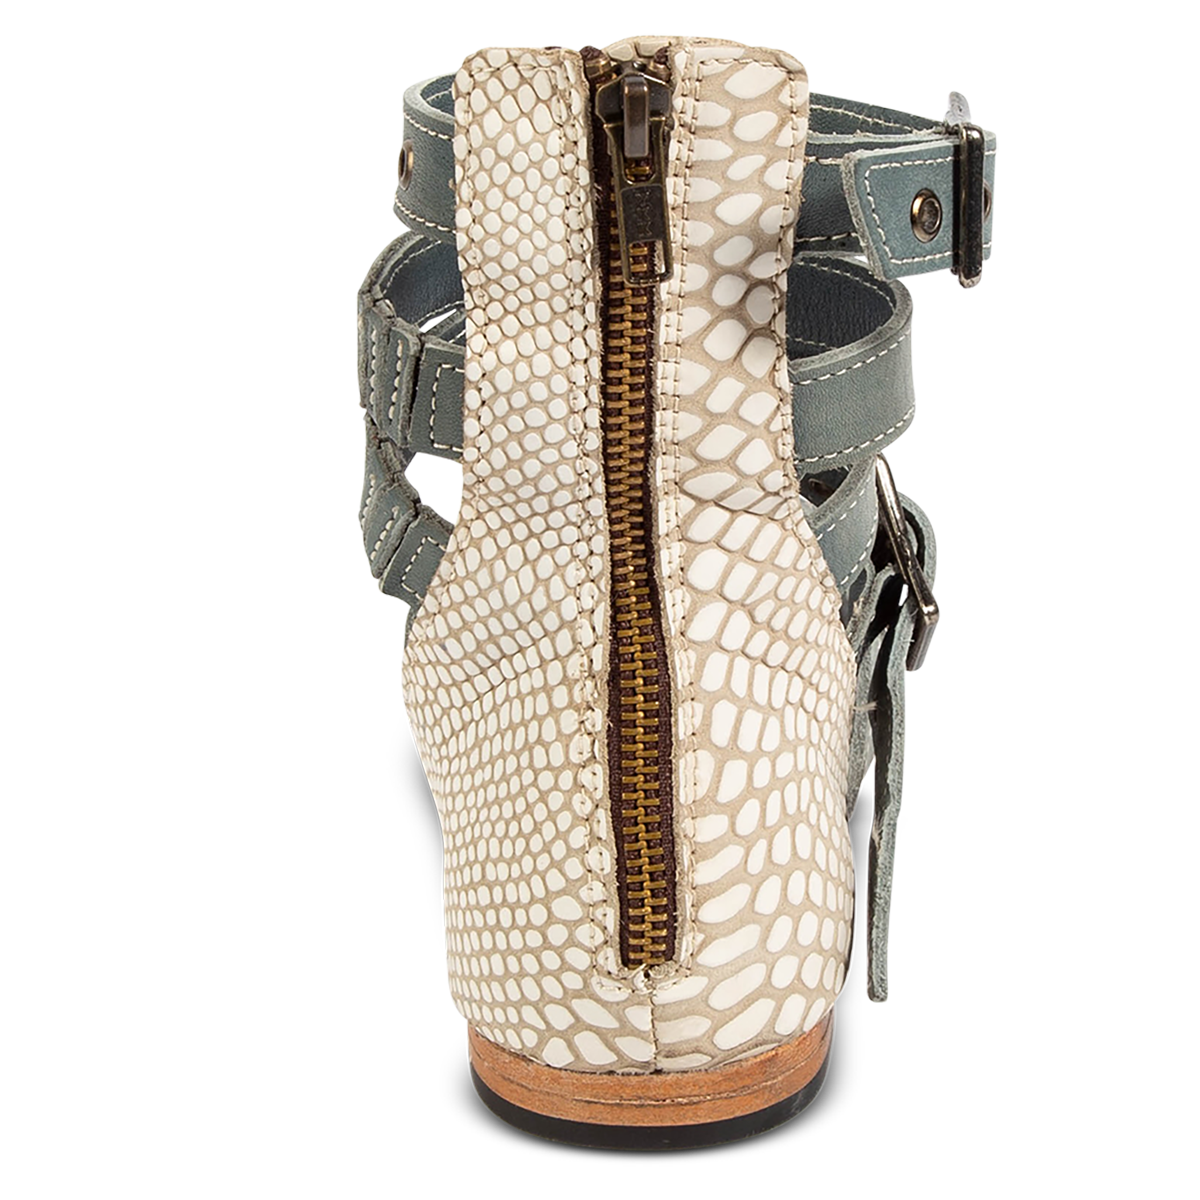 Back view showing an embossed back leather panel and working brass zipper on FREEBIRD women's Sydney blue multi leather gladiator sandal